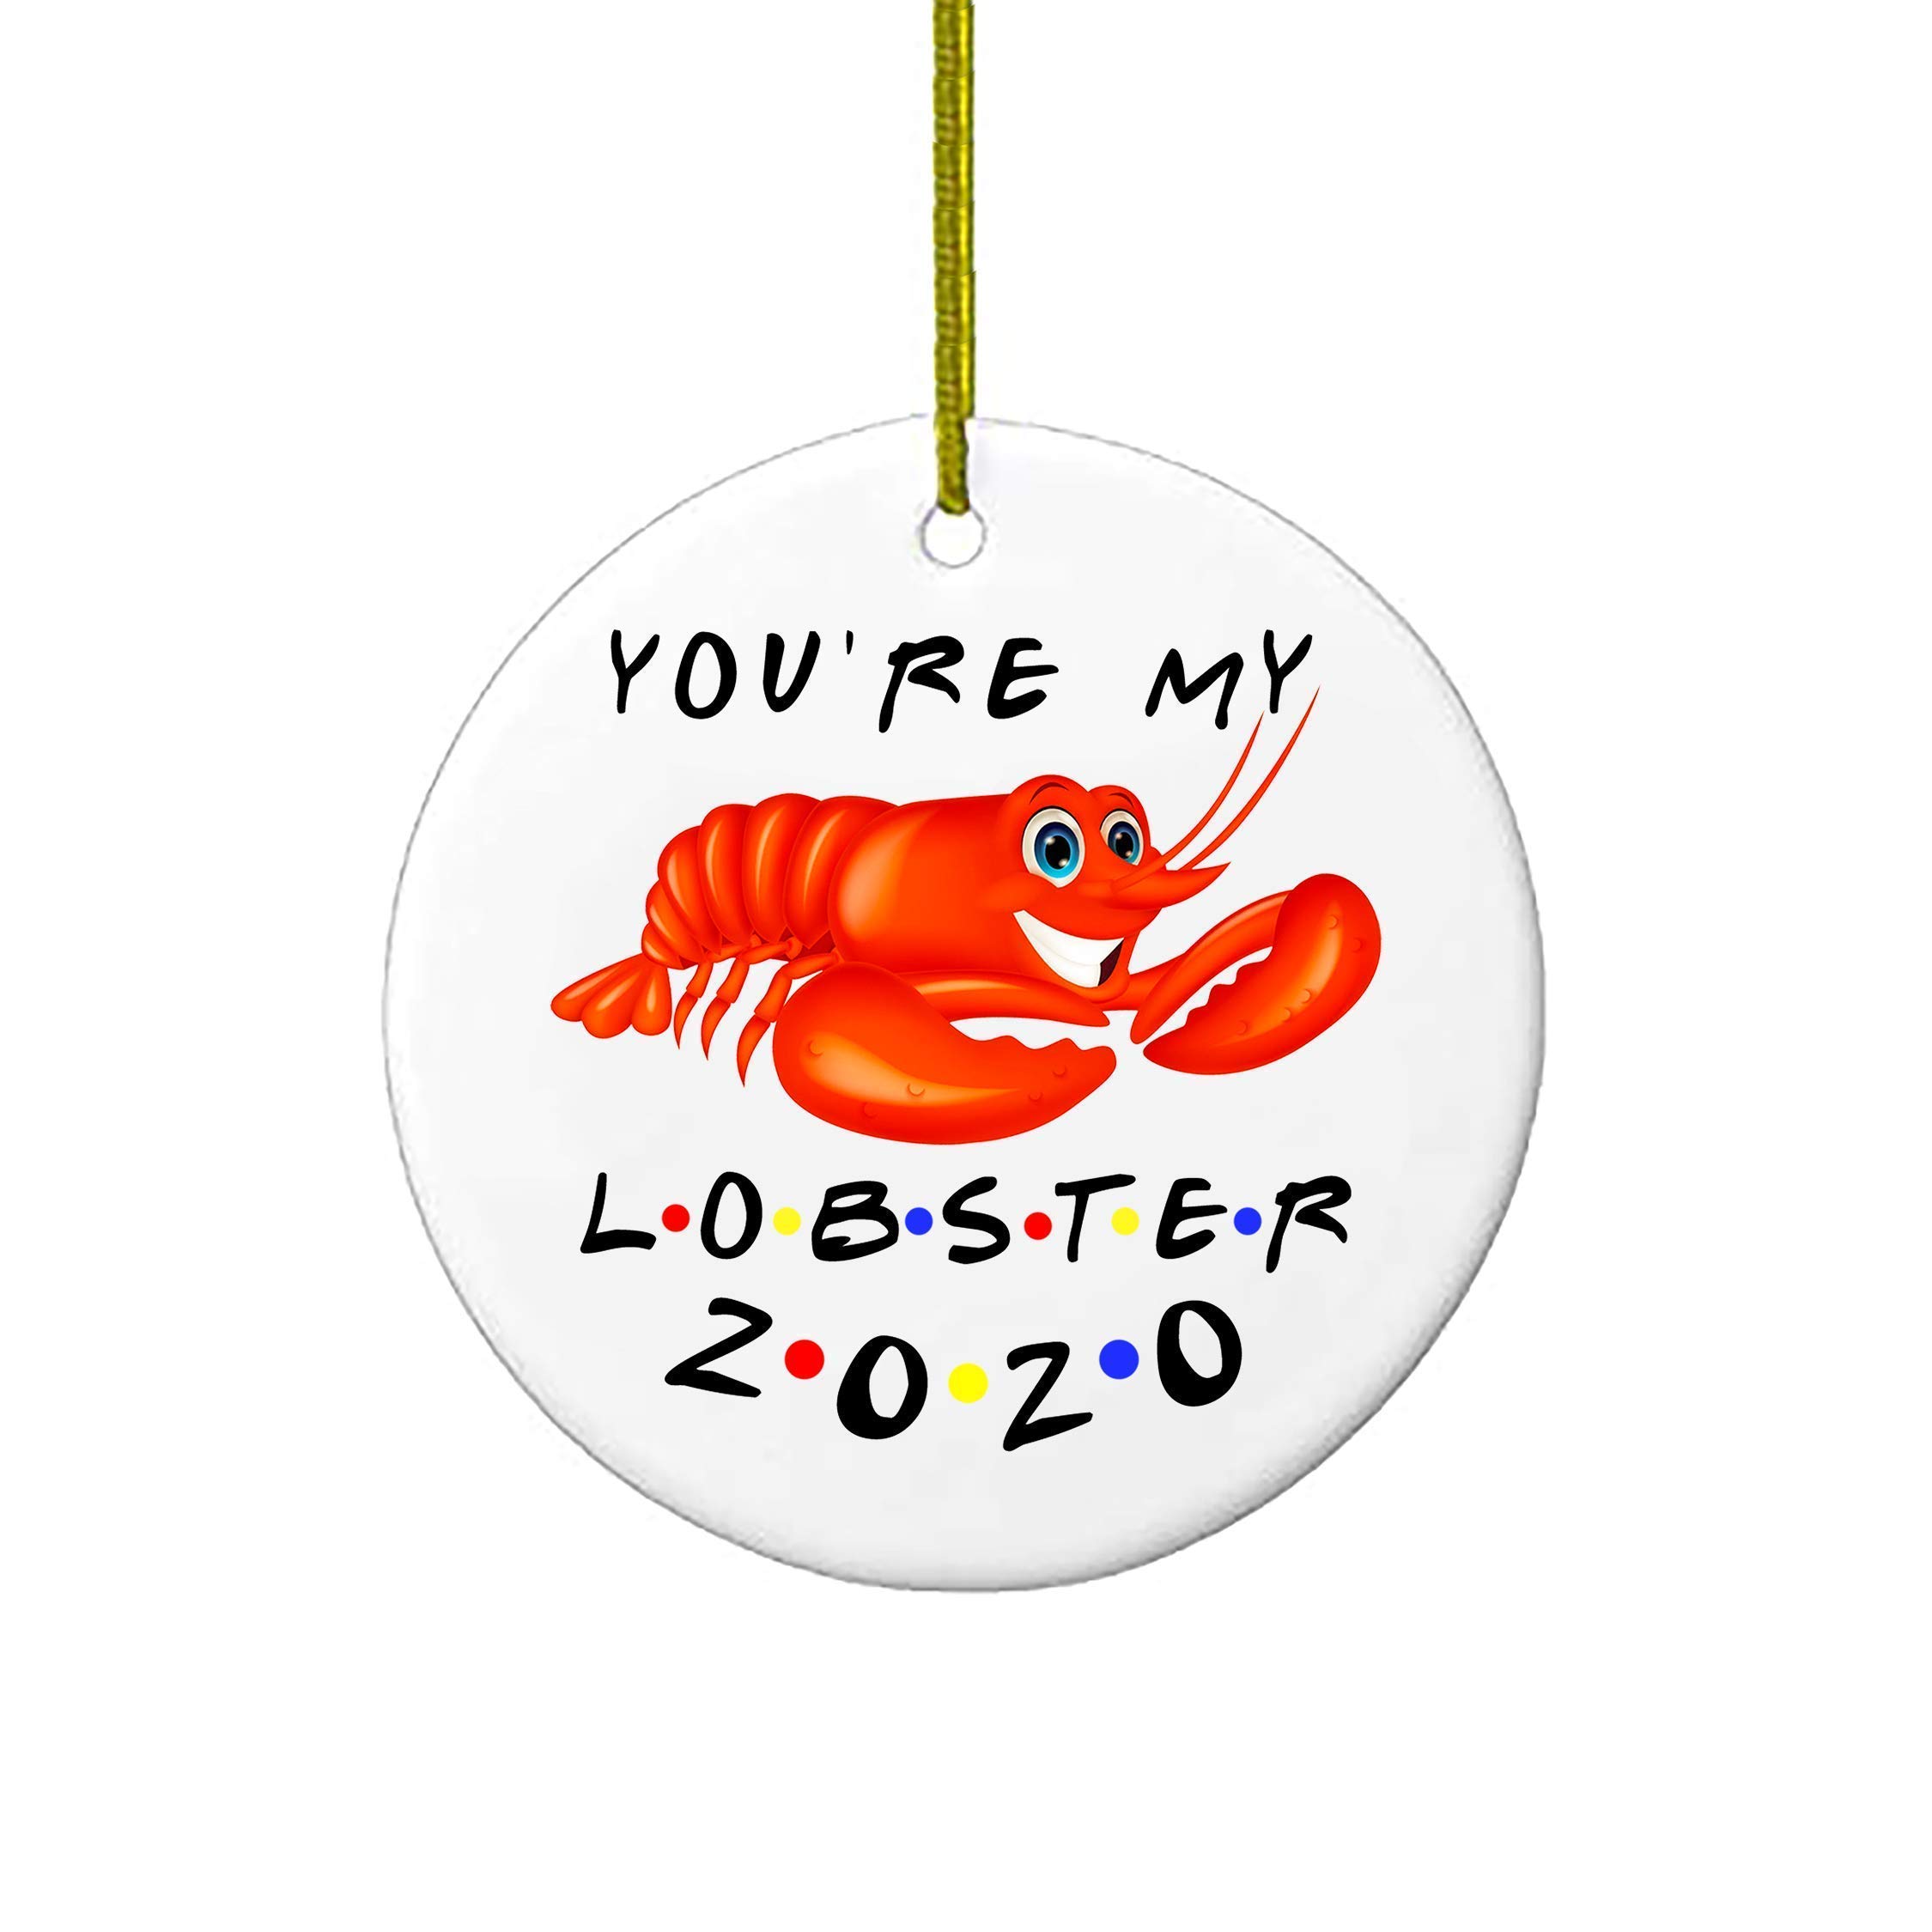 You're My Lobster Friends Christmas Ornaments Gift Holiday Xmas Tree Ornament 2020 Personalized Gifts